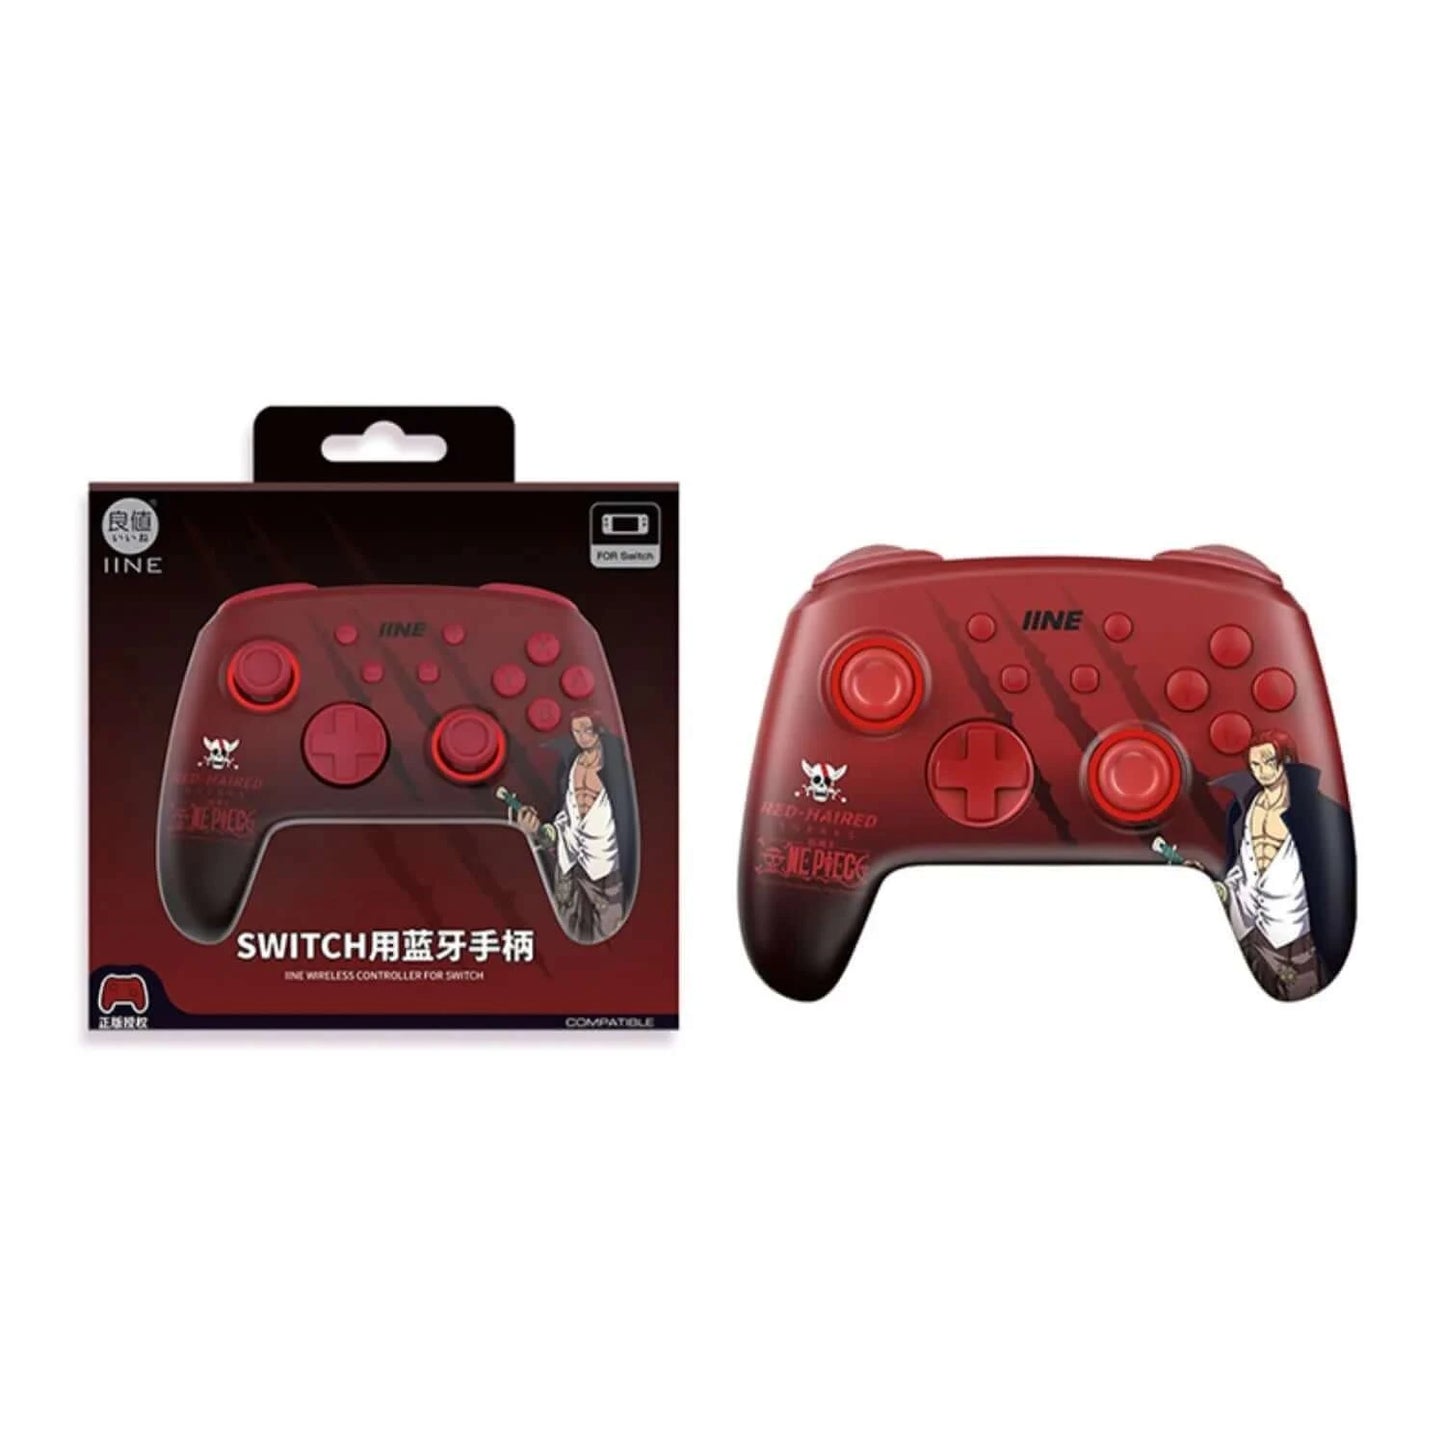 Red Haired Gamepad | $120.00